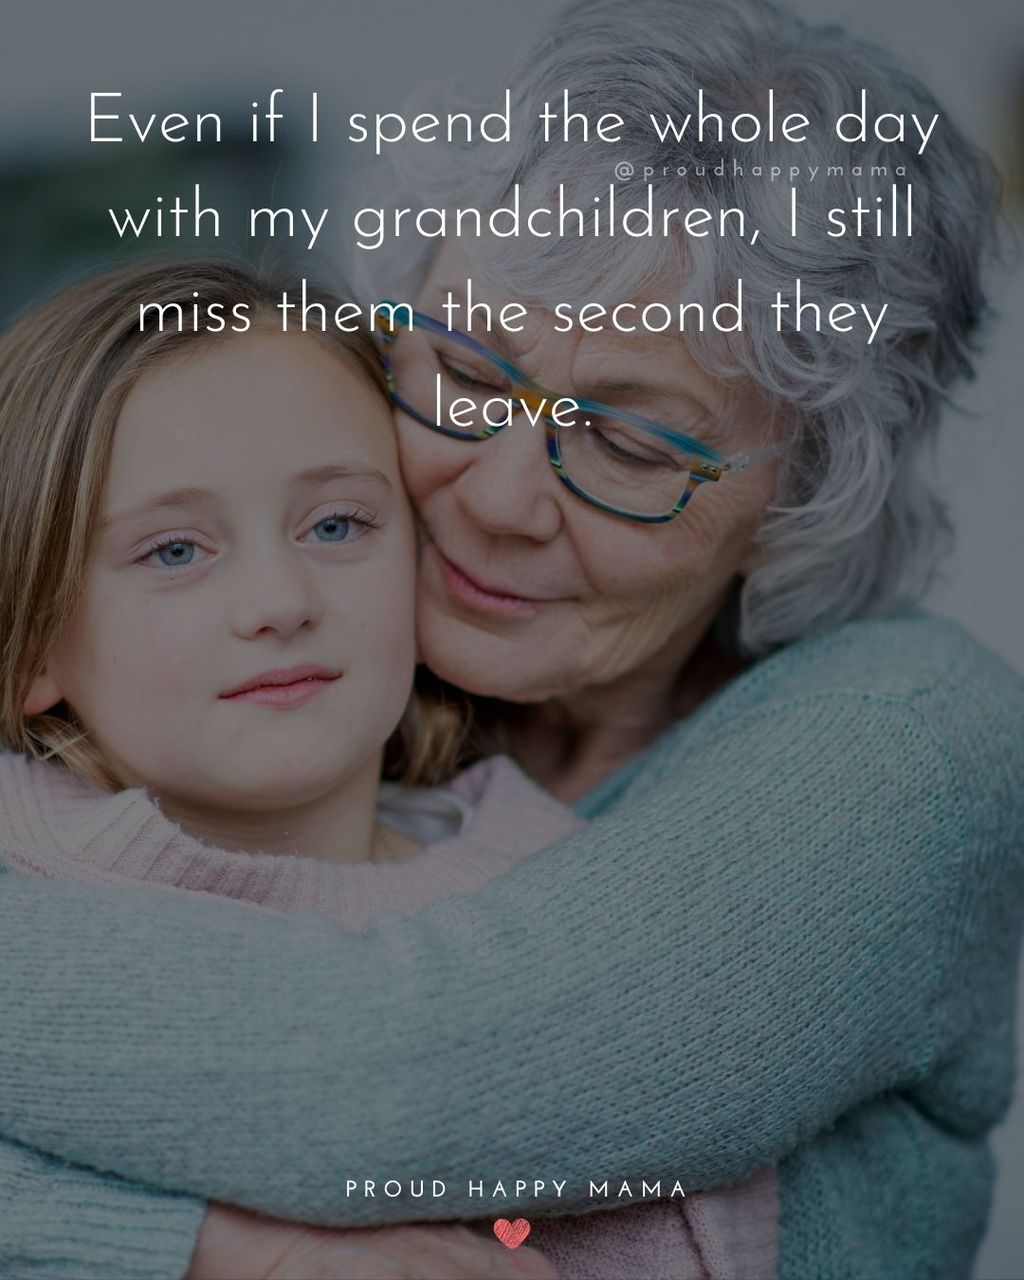 Quotes for Grandchildren - Even if I spend the whole day with my grandchildren, I still miss them the second they leave.